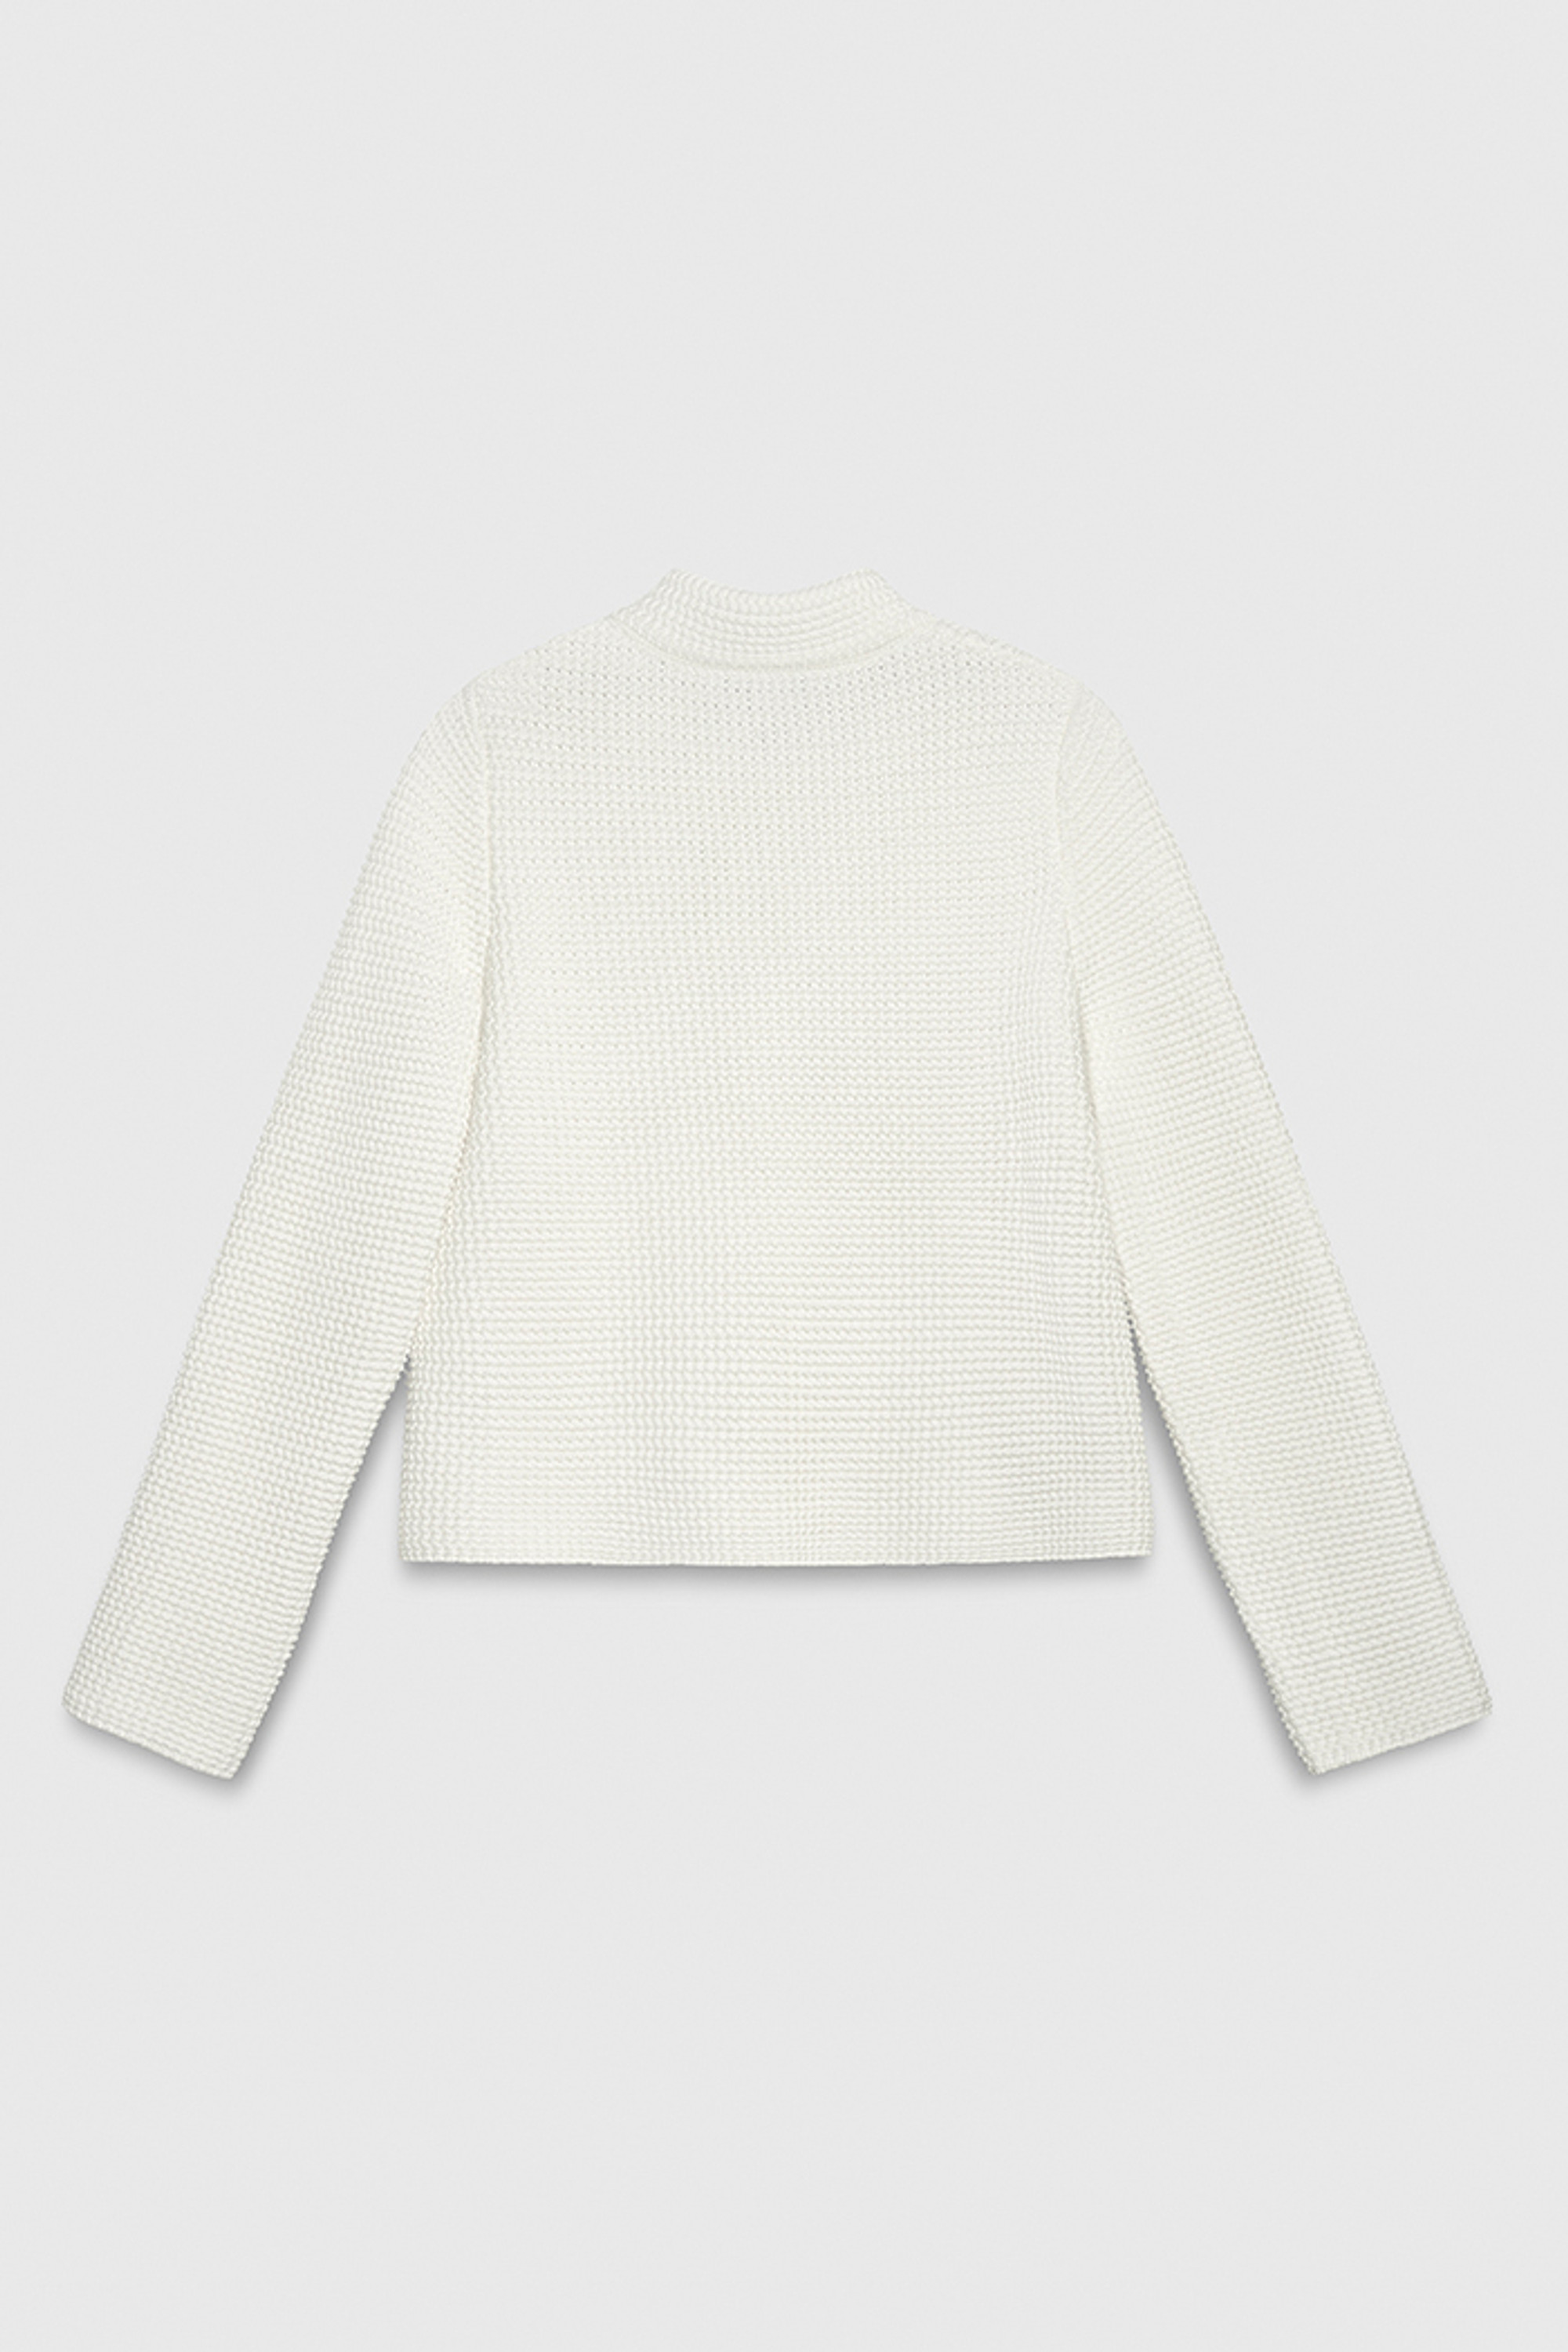 Ingham Knitted Jacket Ivory - Welcome to the Fold LTD